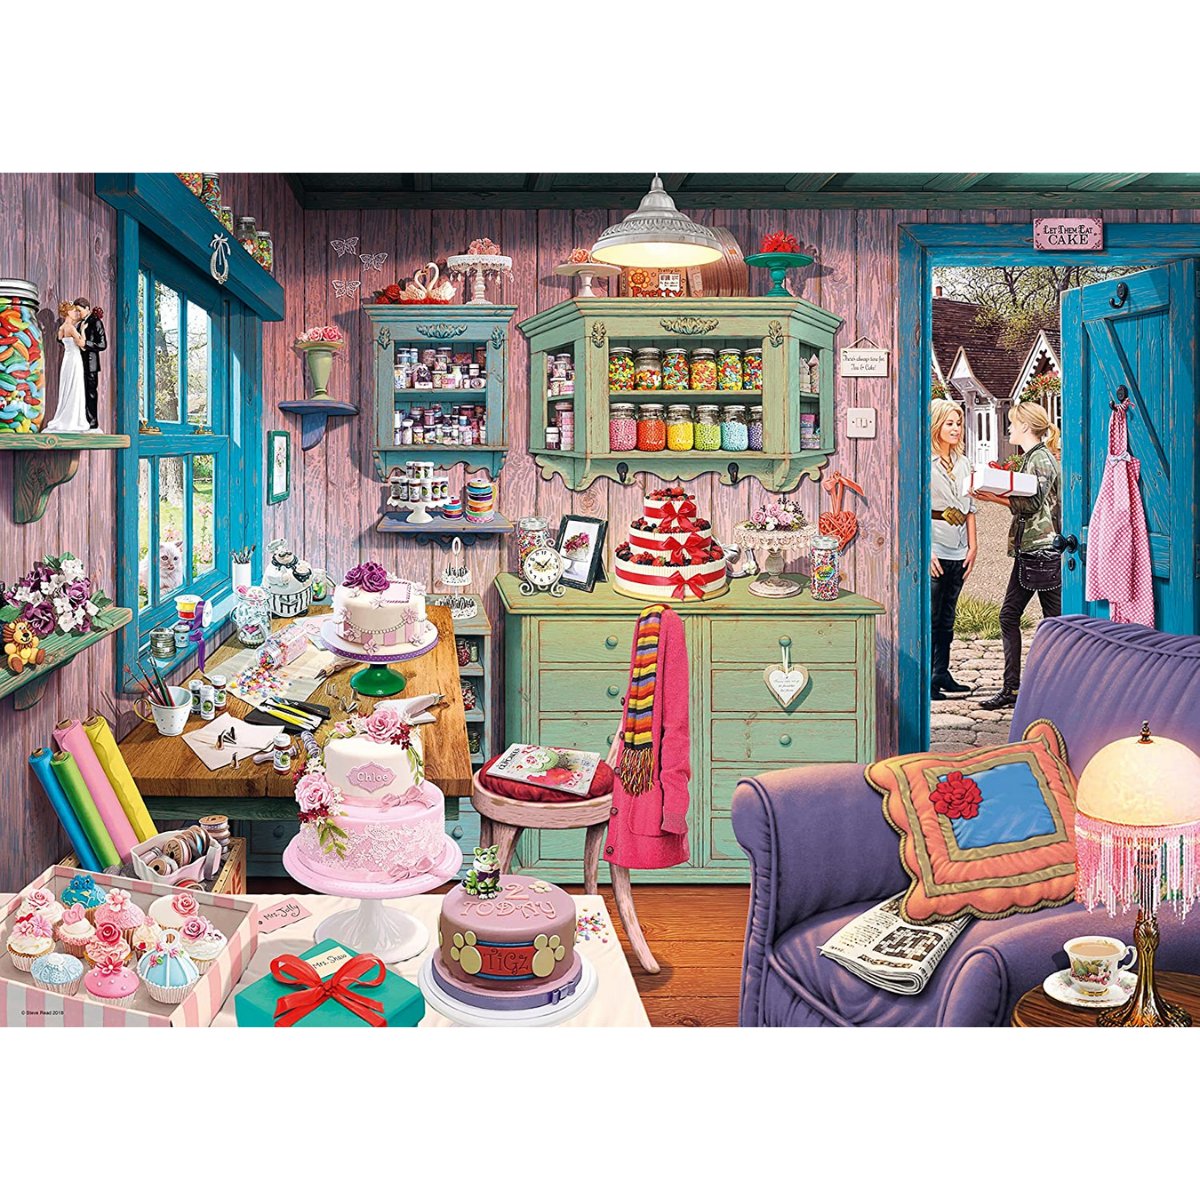 Ravensburger My Haven No 5, The Cake Shed 1000 Piece Jigsaw Puzzle - Phillips Hobbies